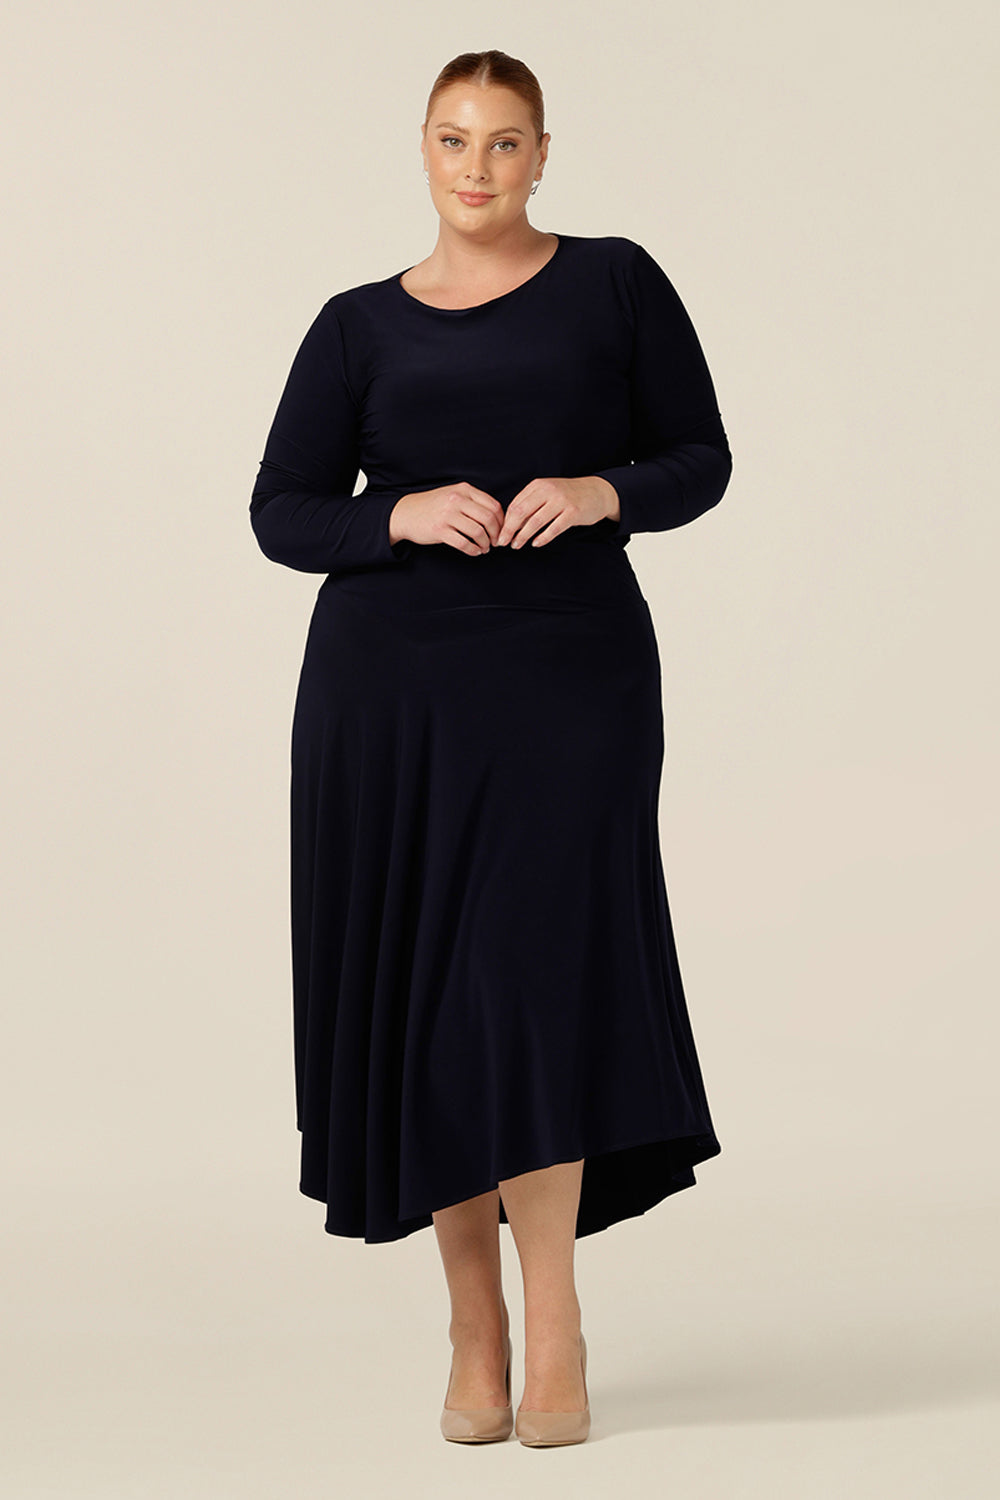 Creating a faux dress look for work and event wear, a long sleeve, boat neck top in navy blue stretch jersey is worn with a navy skirt with asymmetric hemline. 